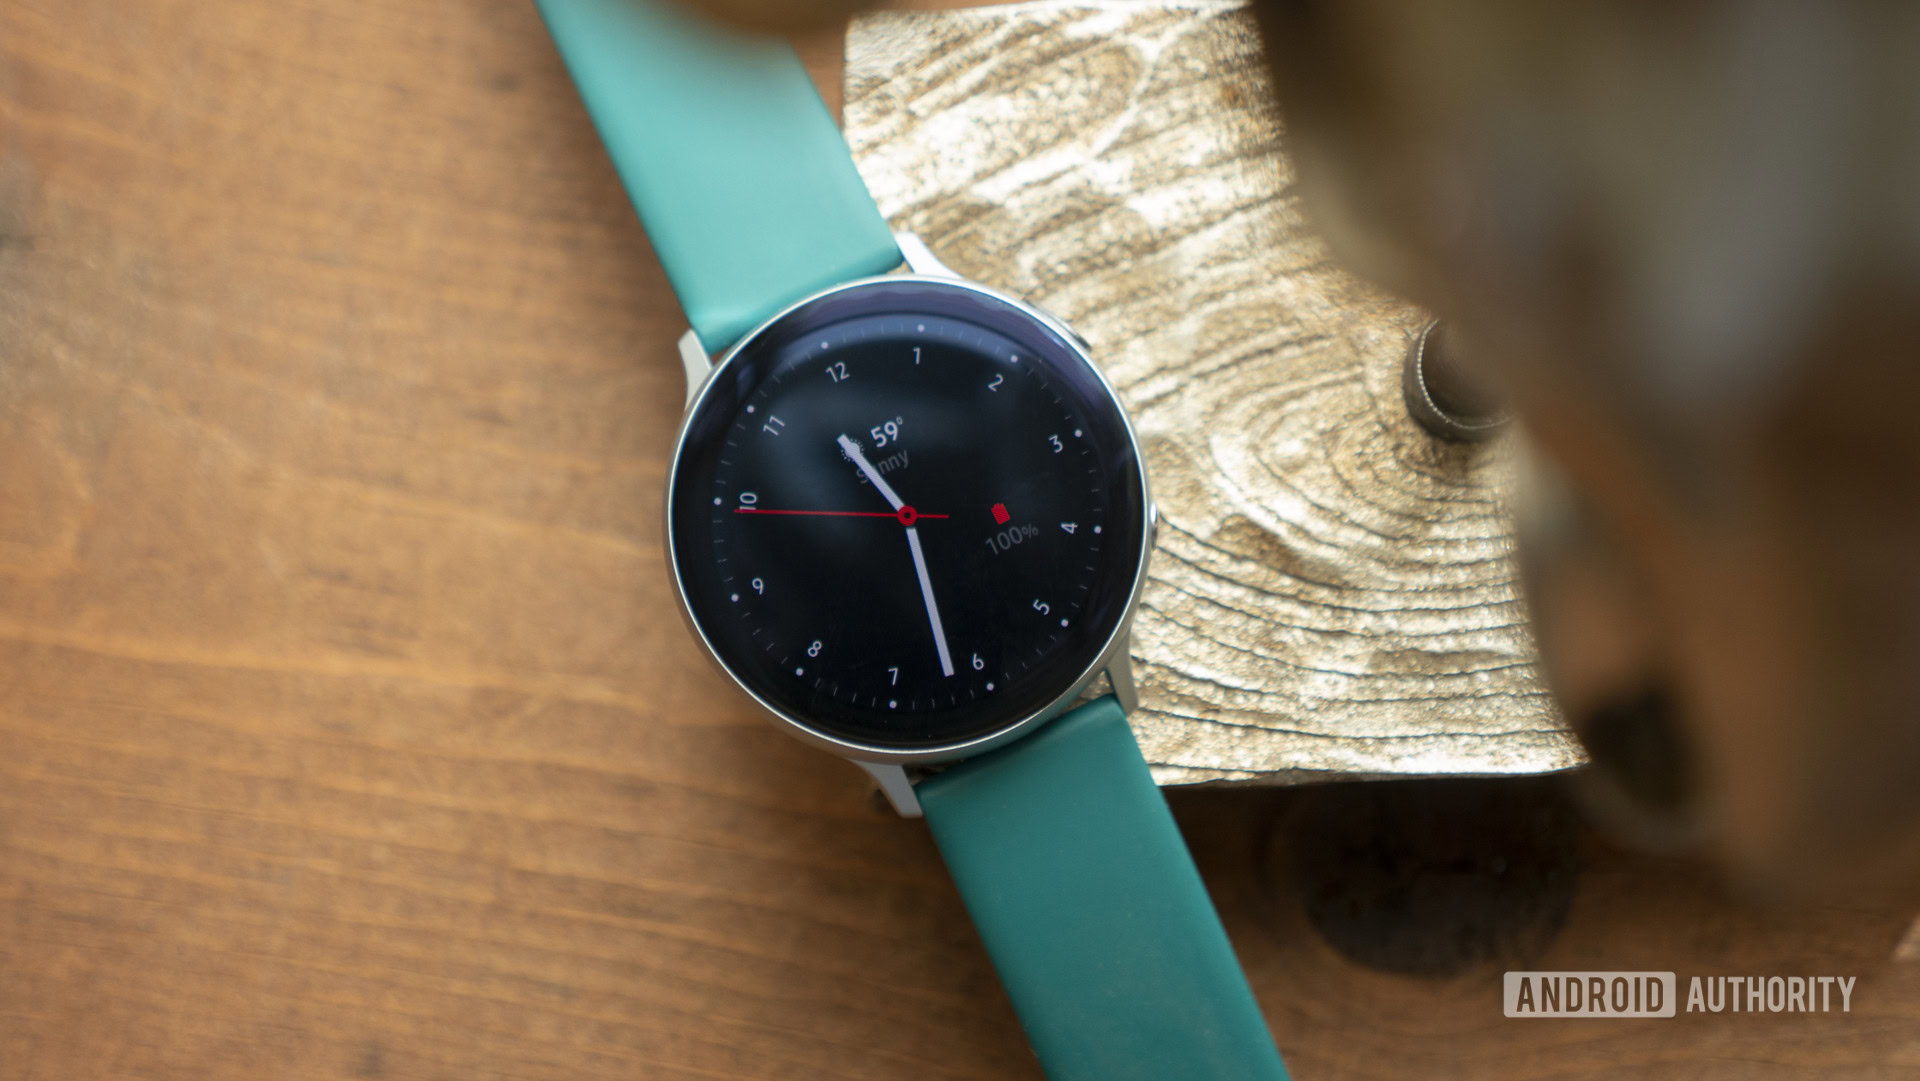 https://www.androidauthority.com/wp-content/uploads/2019/09/samsung-galaxy-watch-active-2-review-watch-face-clock-face-5.jpg